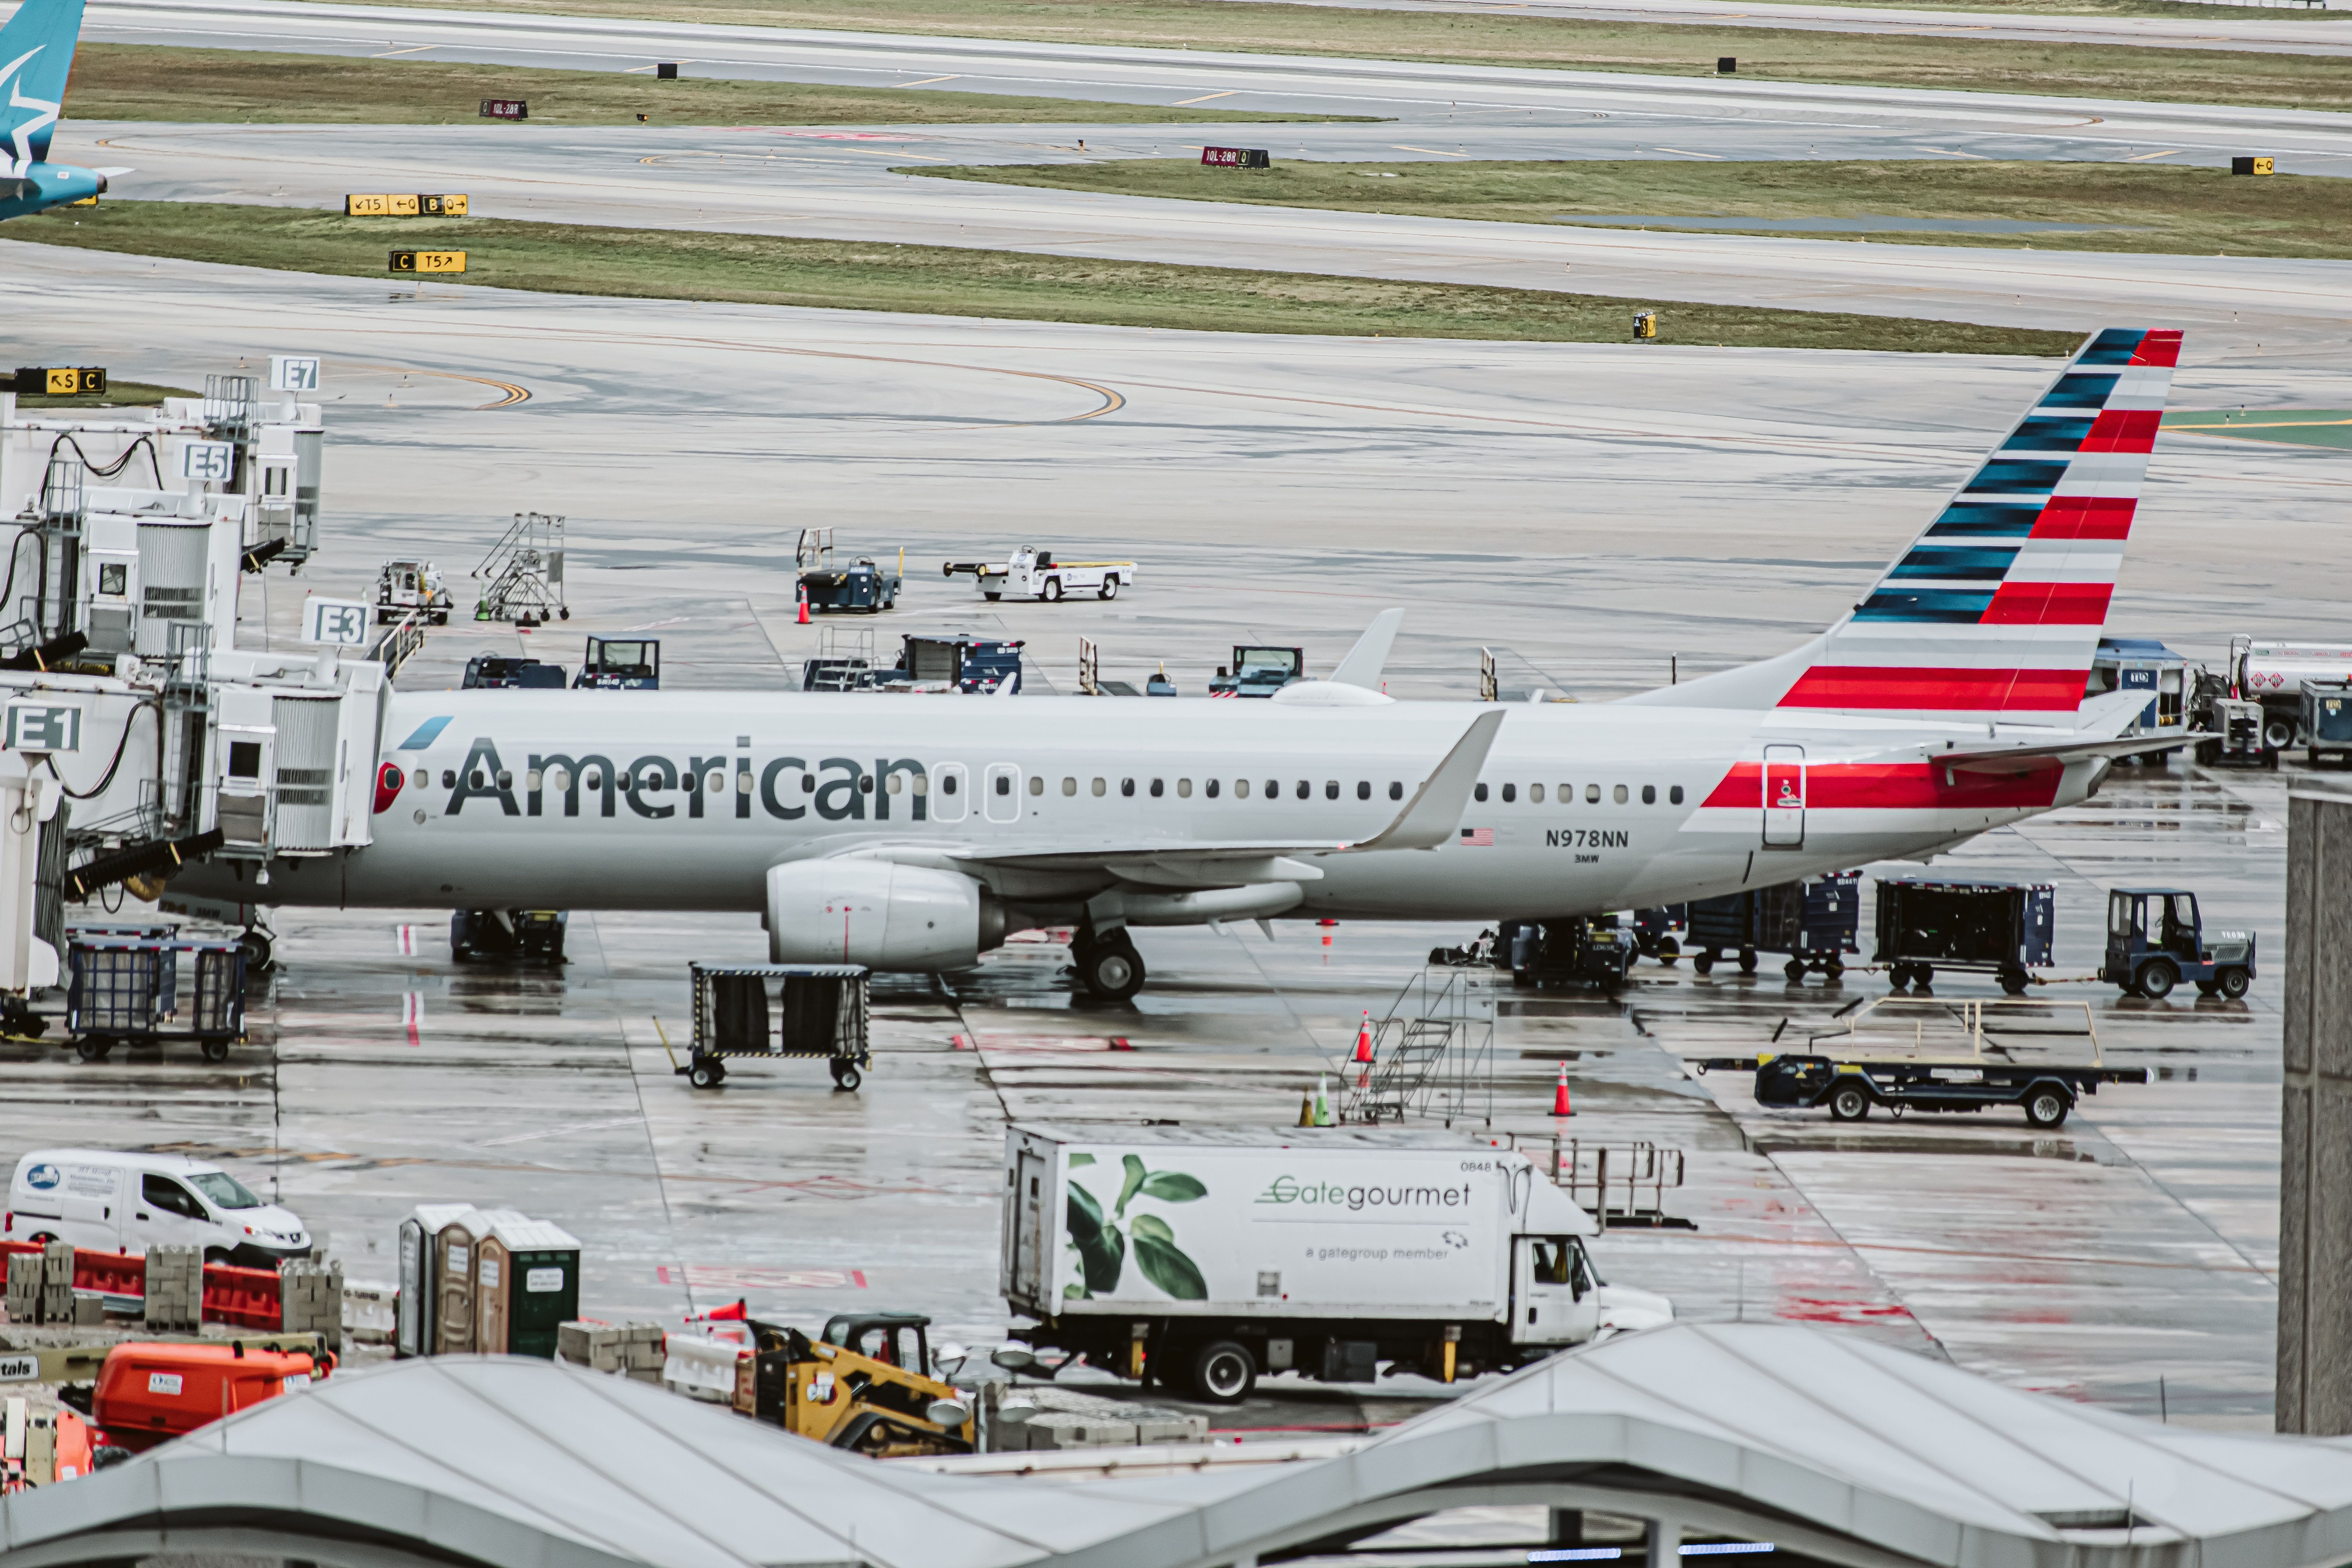 American Airlines Boeing 737-800 FLL-2